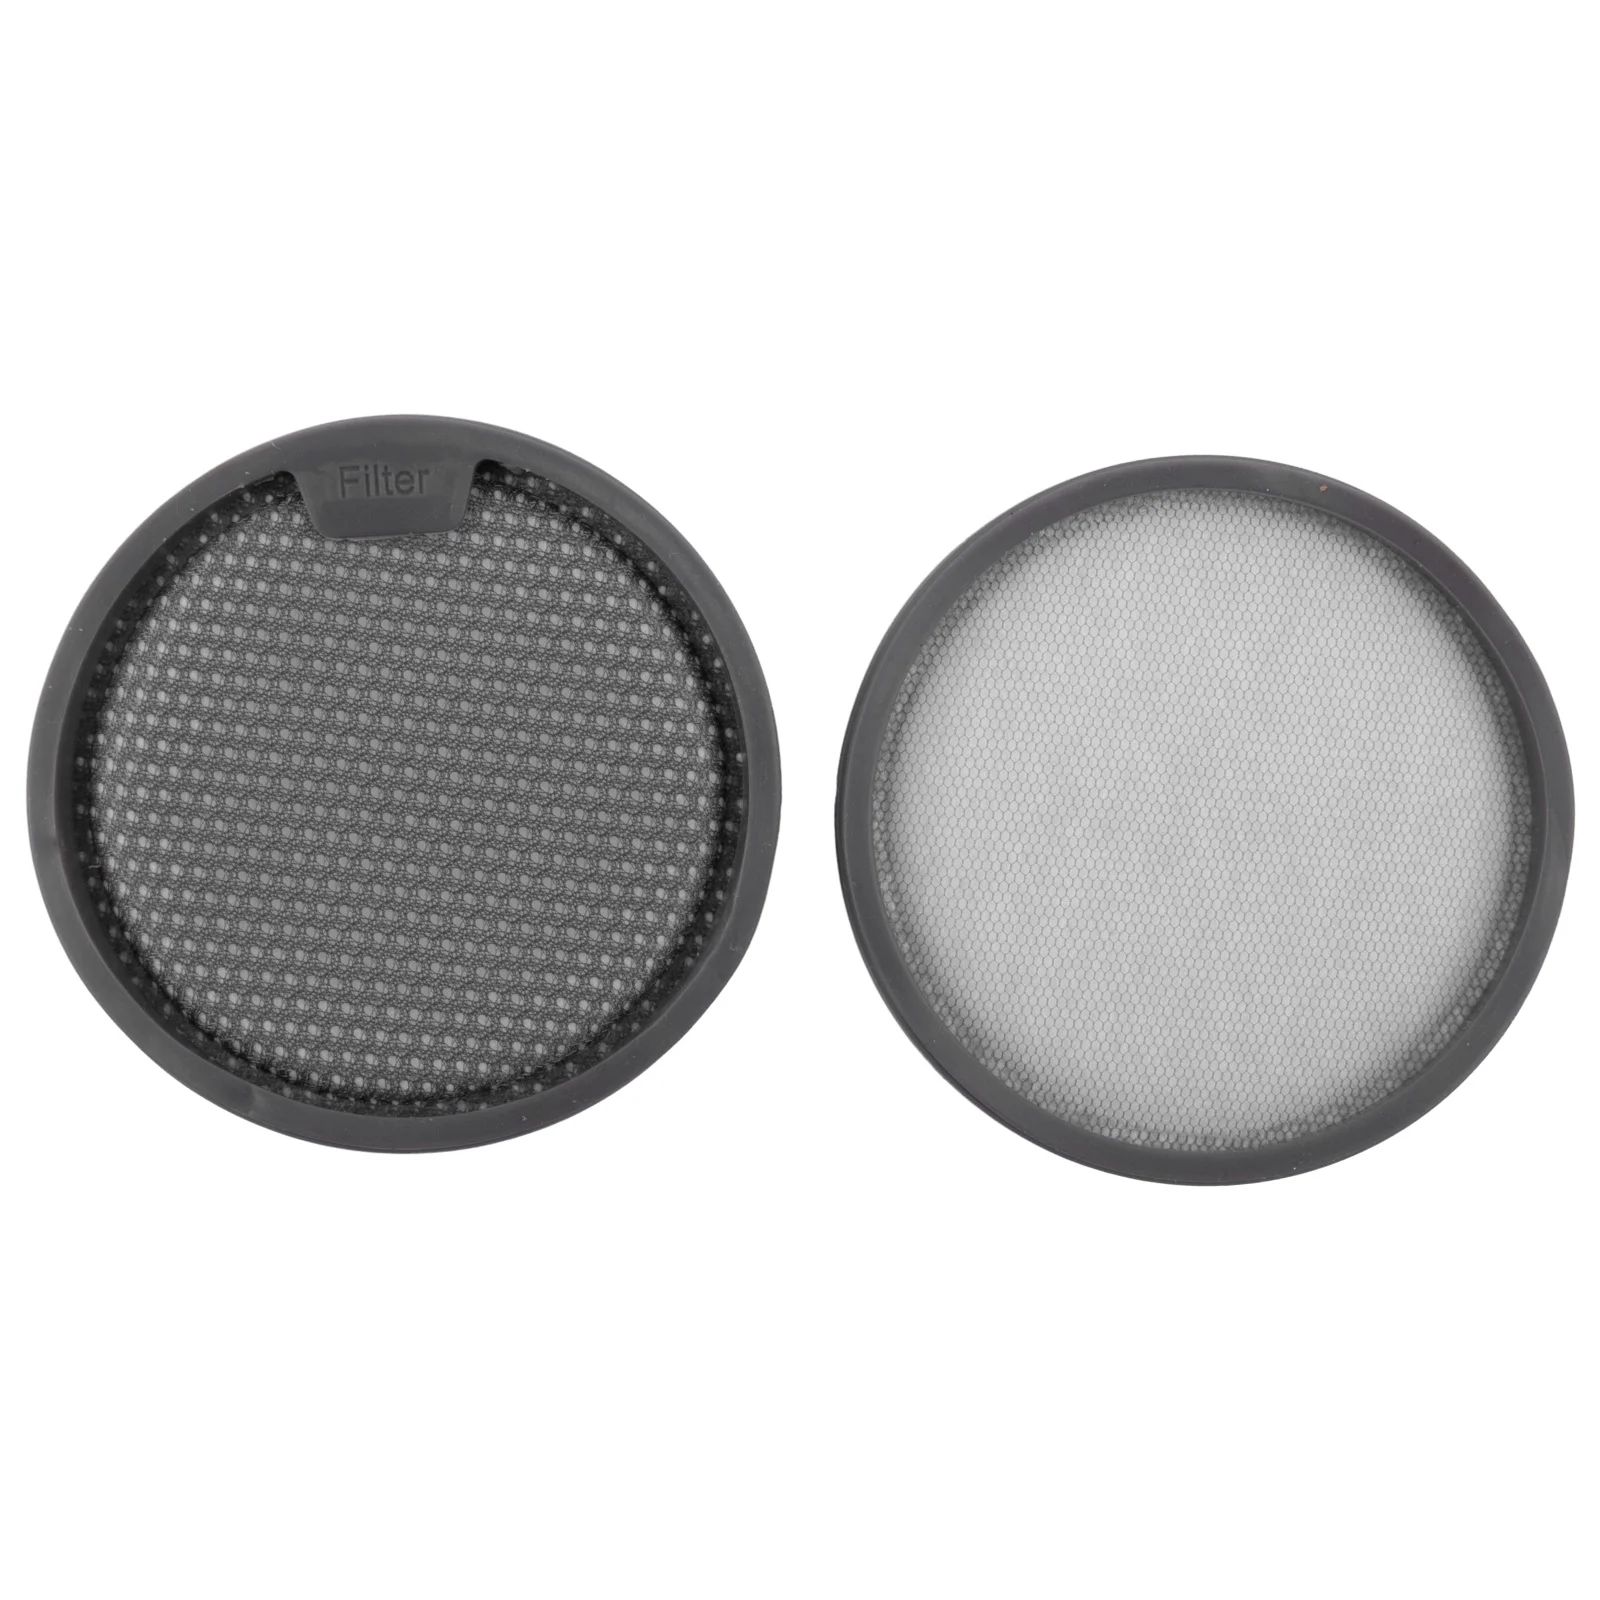 

2pcs Post Filters Household Cleaning Tools Accessories Vacuum Cleaner Replacement Parts For T10 T20 T30 T20 Pro T30 NEO R10 R20